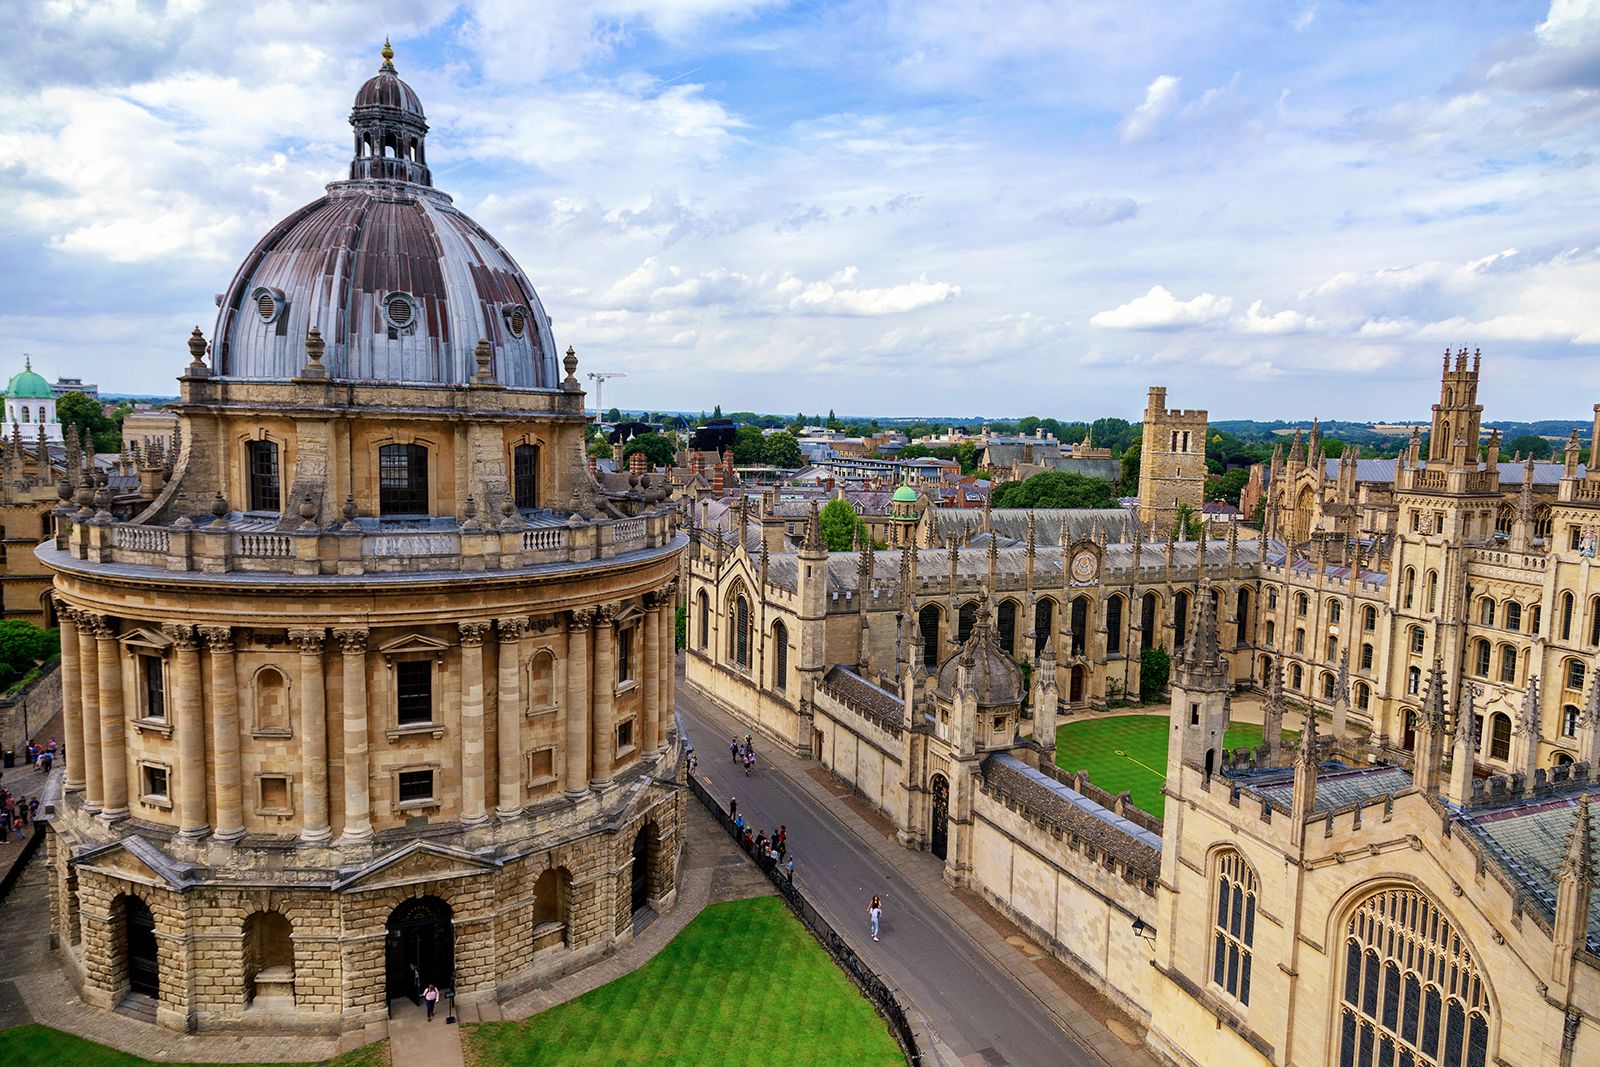 Rising Trend: More Singaporean Students Heading to Oxbridge - What's the Drive?